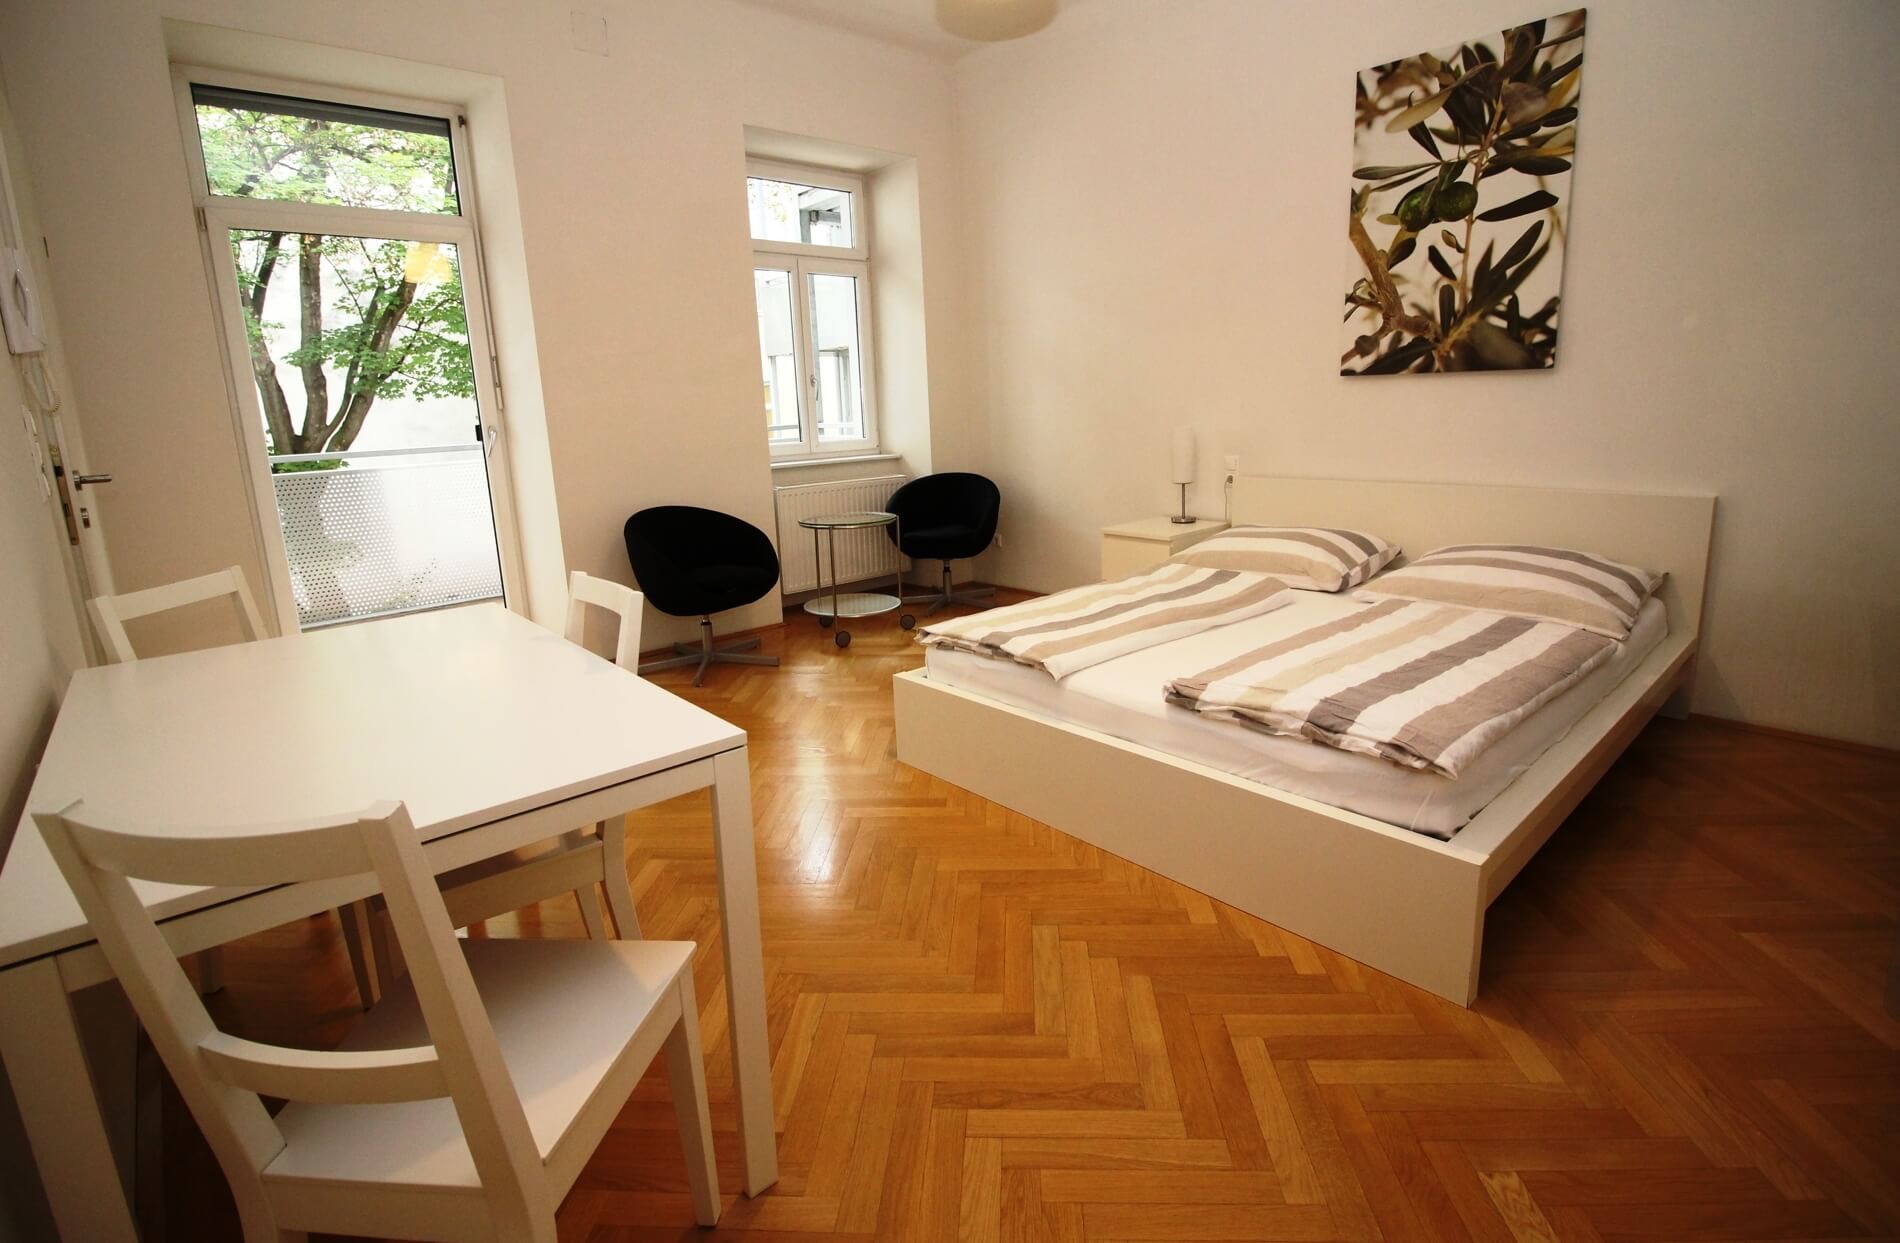 Completely furnished 2-bedroom apartment with Balcony in Vienna (great location) 30